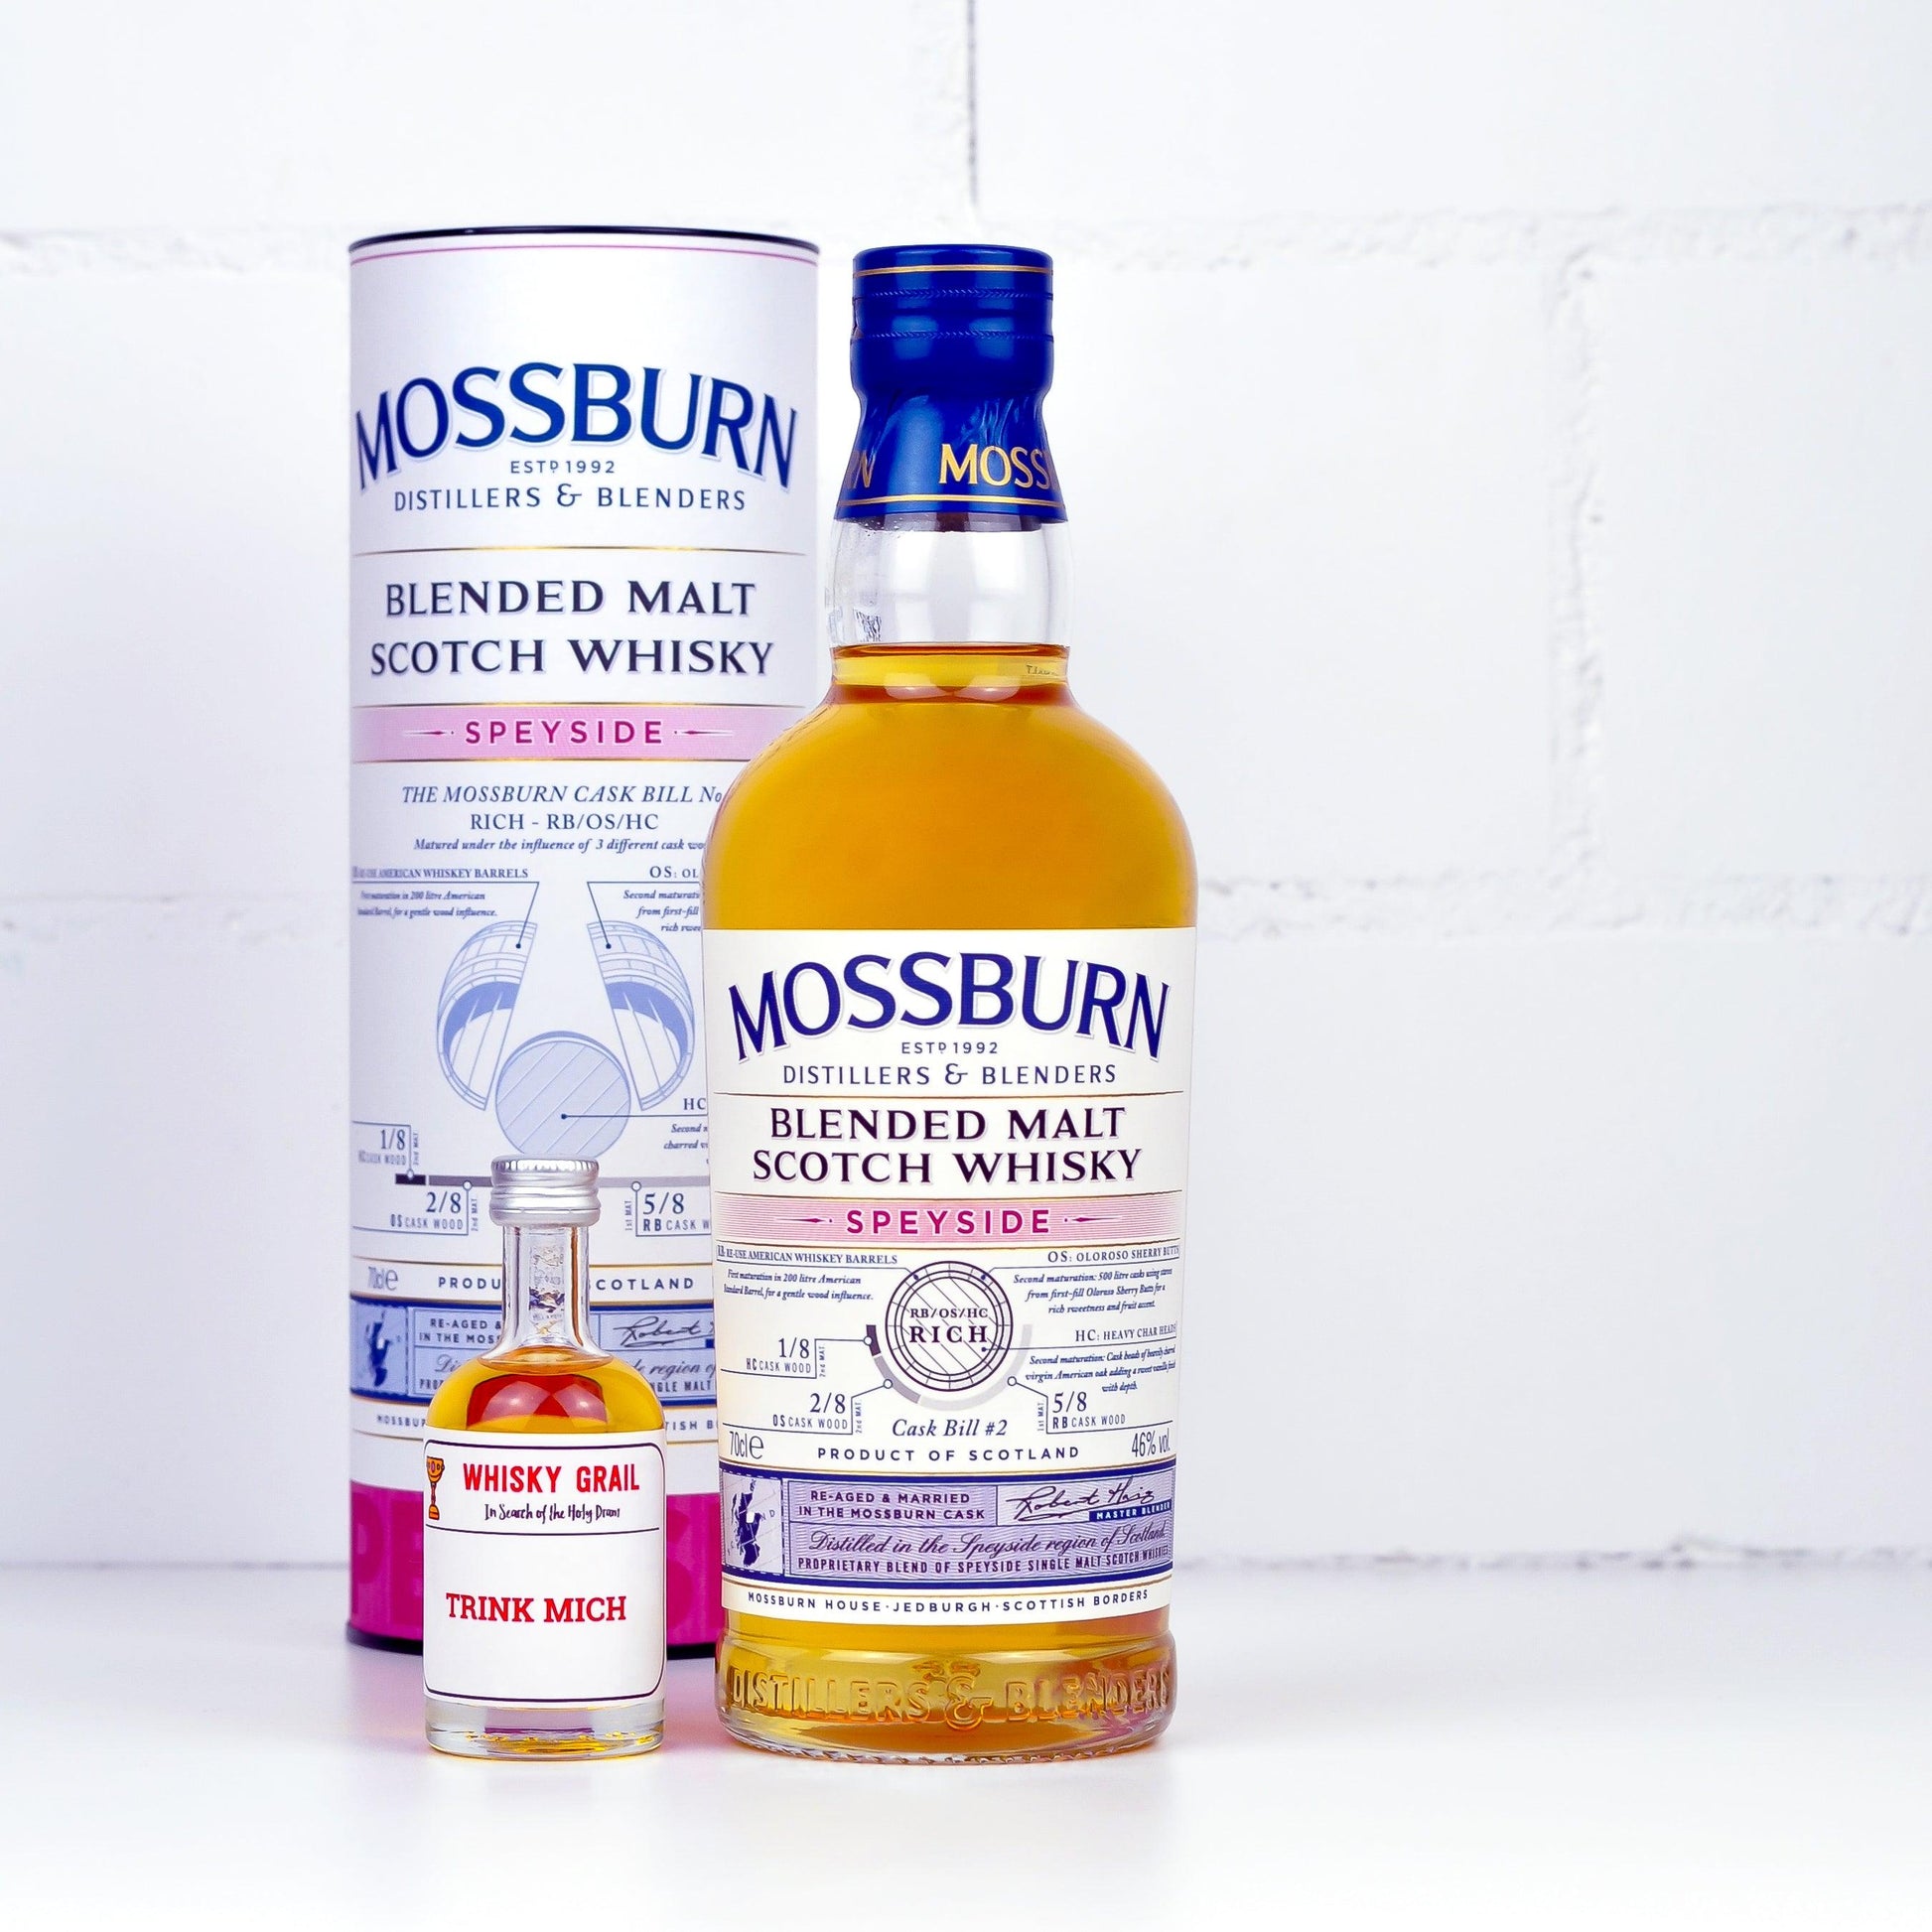 Mossburn Signature Cask Speyside No. 2 - Whisky Grail